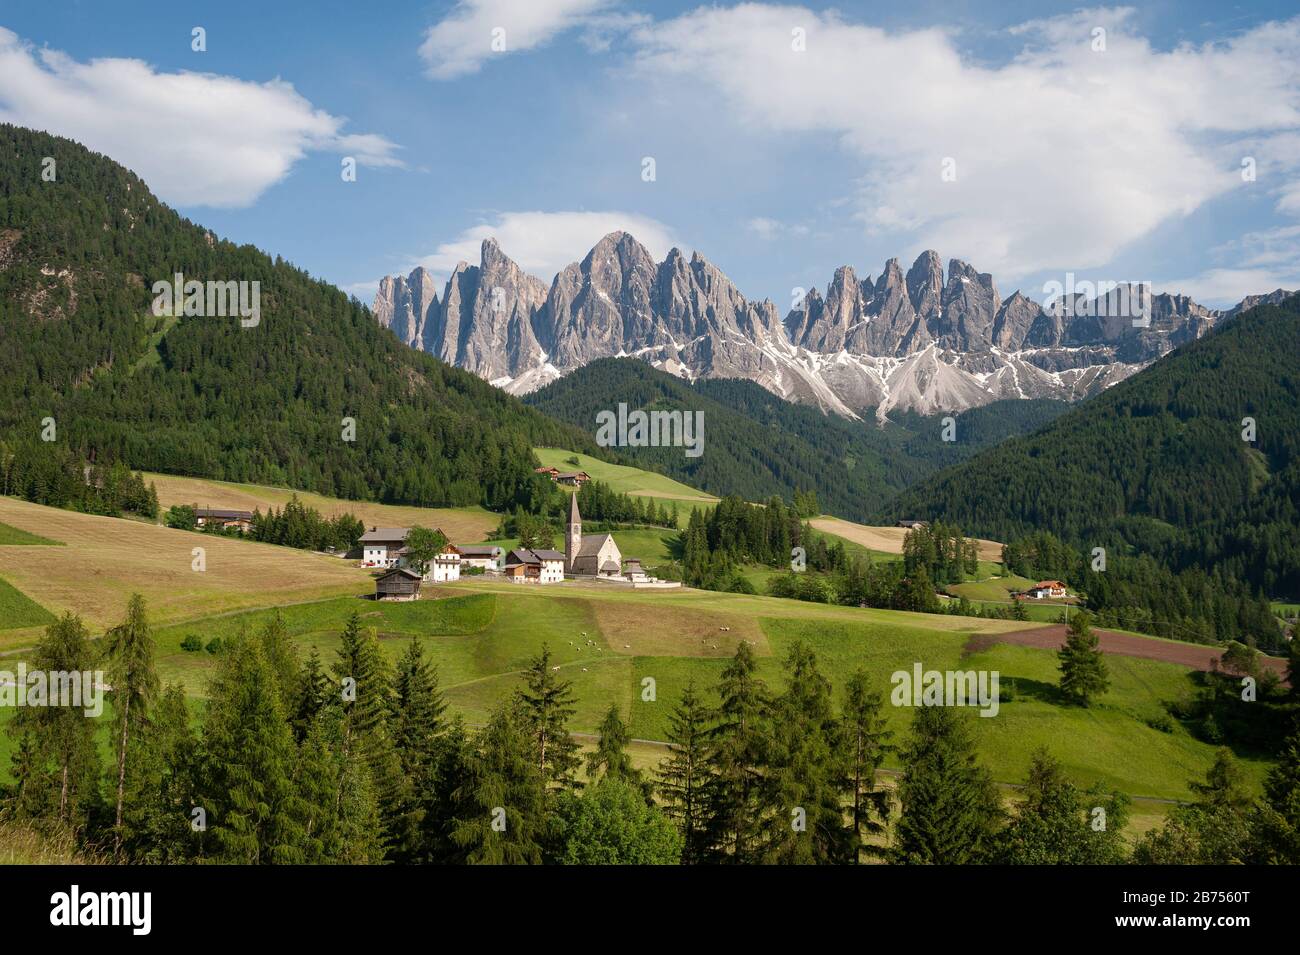 20.06.2019, St. Magdalena, Villnoess, Trentino, South Tyrol, Italy, Europe - The Nature Park in the Villnoesstal Valley with mountains of the Dolomites of the Puez Geisler Group. [automated translation] Stock Photo